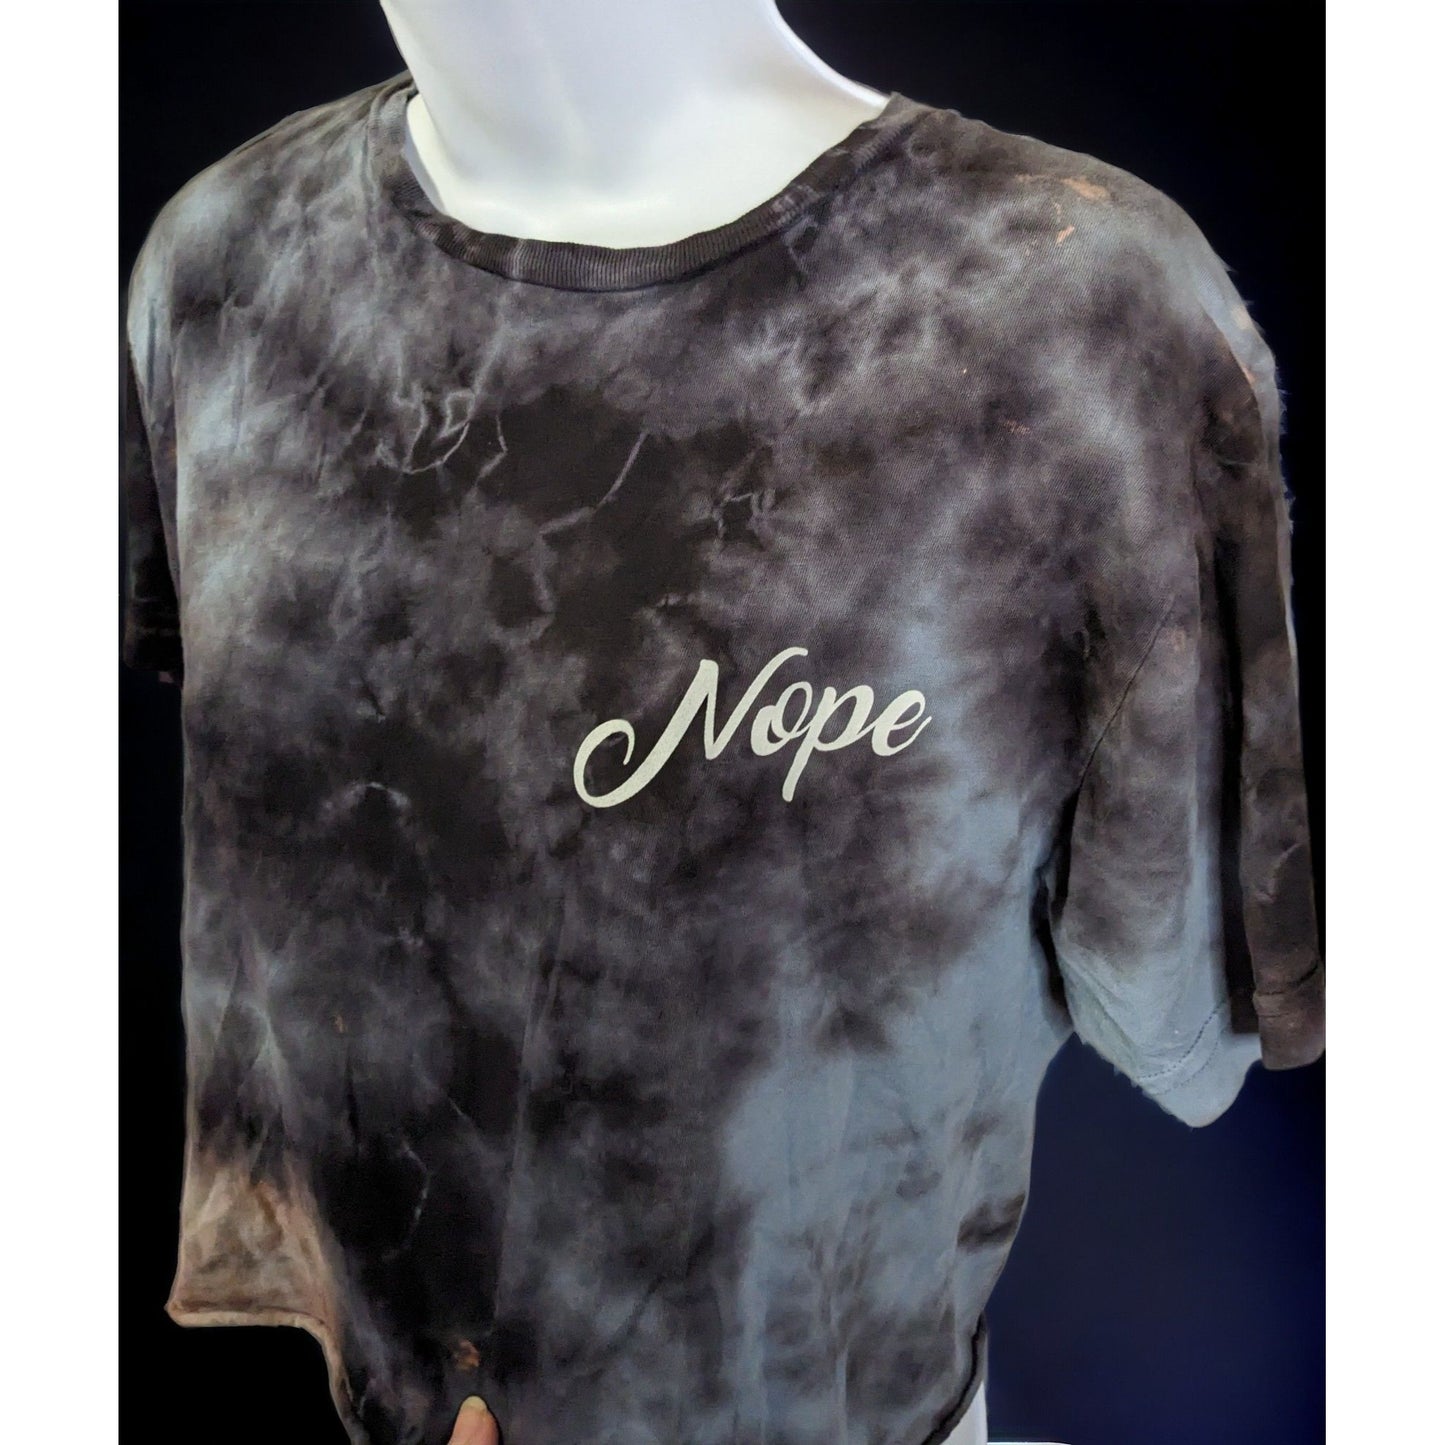 Byproduct Nope Tie-Dye Cropped Shirt